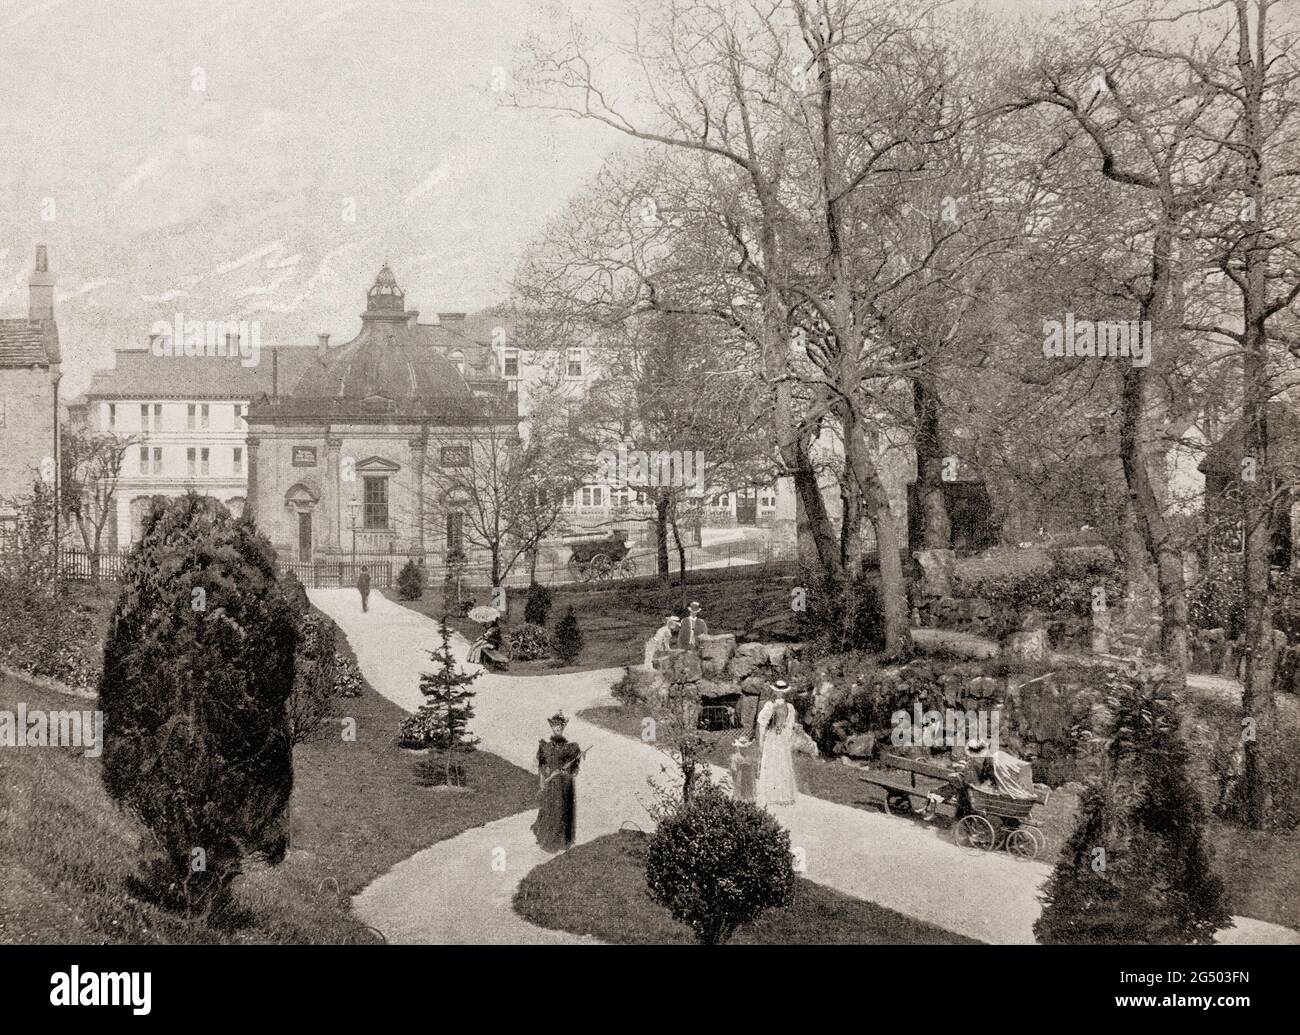 A late 19th century view of the Bog Gardens in Harrogate, known as 'The English Spa' in the Georgian era, after its waters were discovered in the 16th century, North Yorkshire, England. The spa water containing iron, sulphur and common salt, were a popular health treatment, and the influx of wealthy but sickly visitors contributed significantly to the wealth of the town. Stock Photo